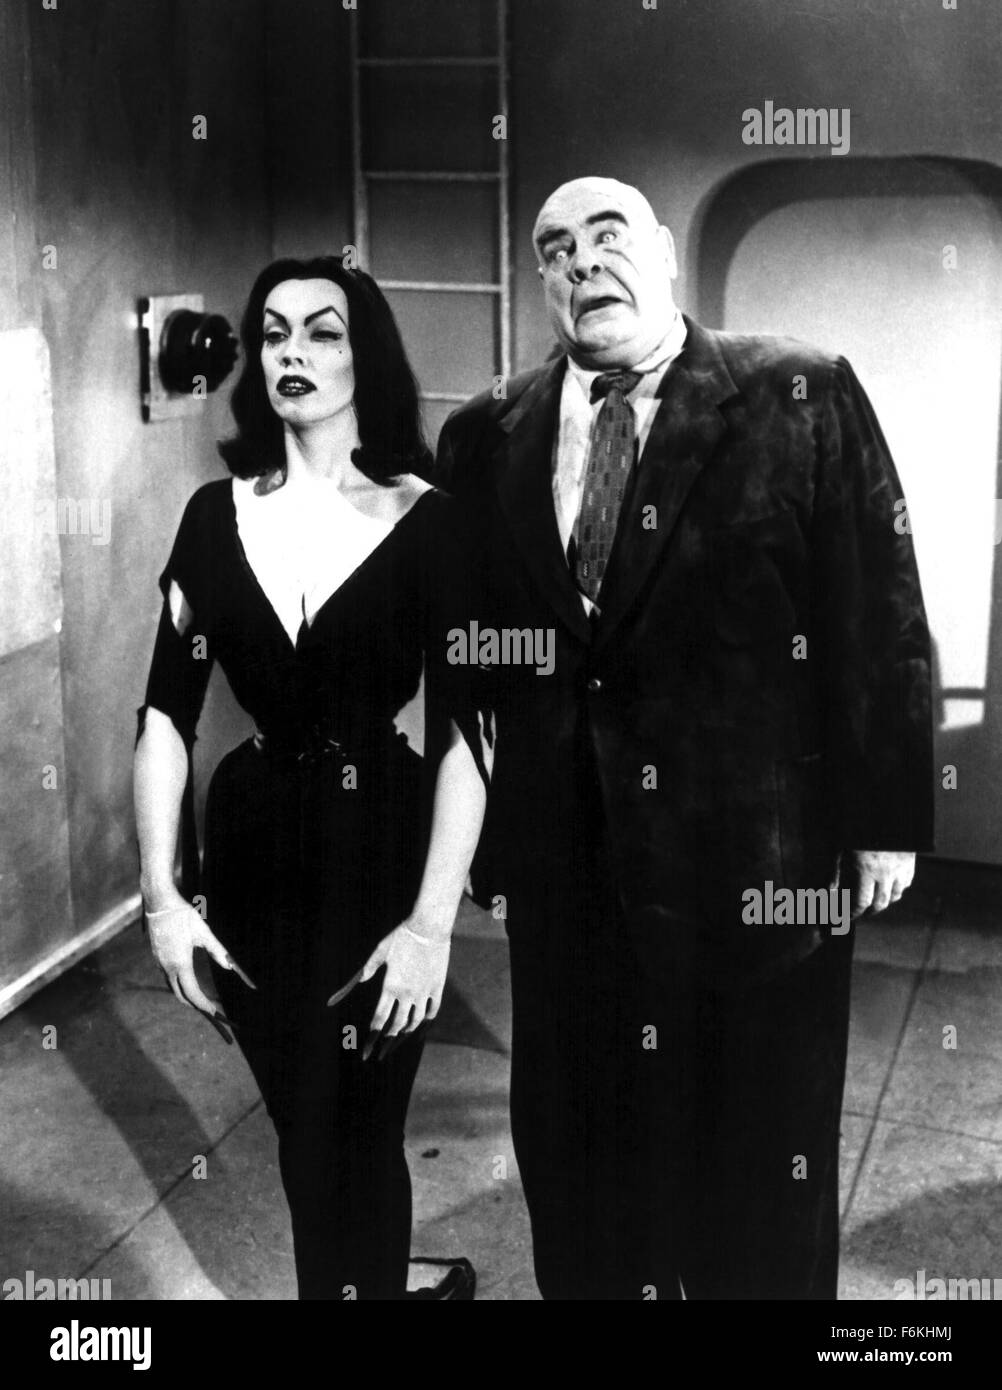 Nov 18, 2006; Hollywood, CA, USA; RELEASE DATE: 1959. DIRECTOR: Edward D. Wood Jr. STUDIO: Reynold's Pictures Inc. PLOT: Aliens resurrect dead humans as zombies and vampires to stop human kind from creating the Solaranite (a sort of sun-driven bomb). PICTURED: VAMPIRA and TOR JOHNSON.   Mandatory Credit: Photo by Reynold's Pictures. (c) Copyright 2006 by Reynold's Pictures Stock Photo